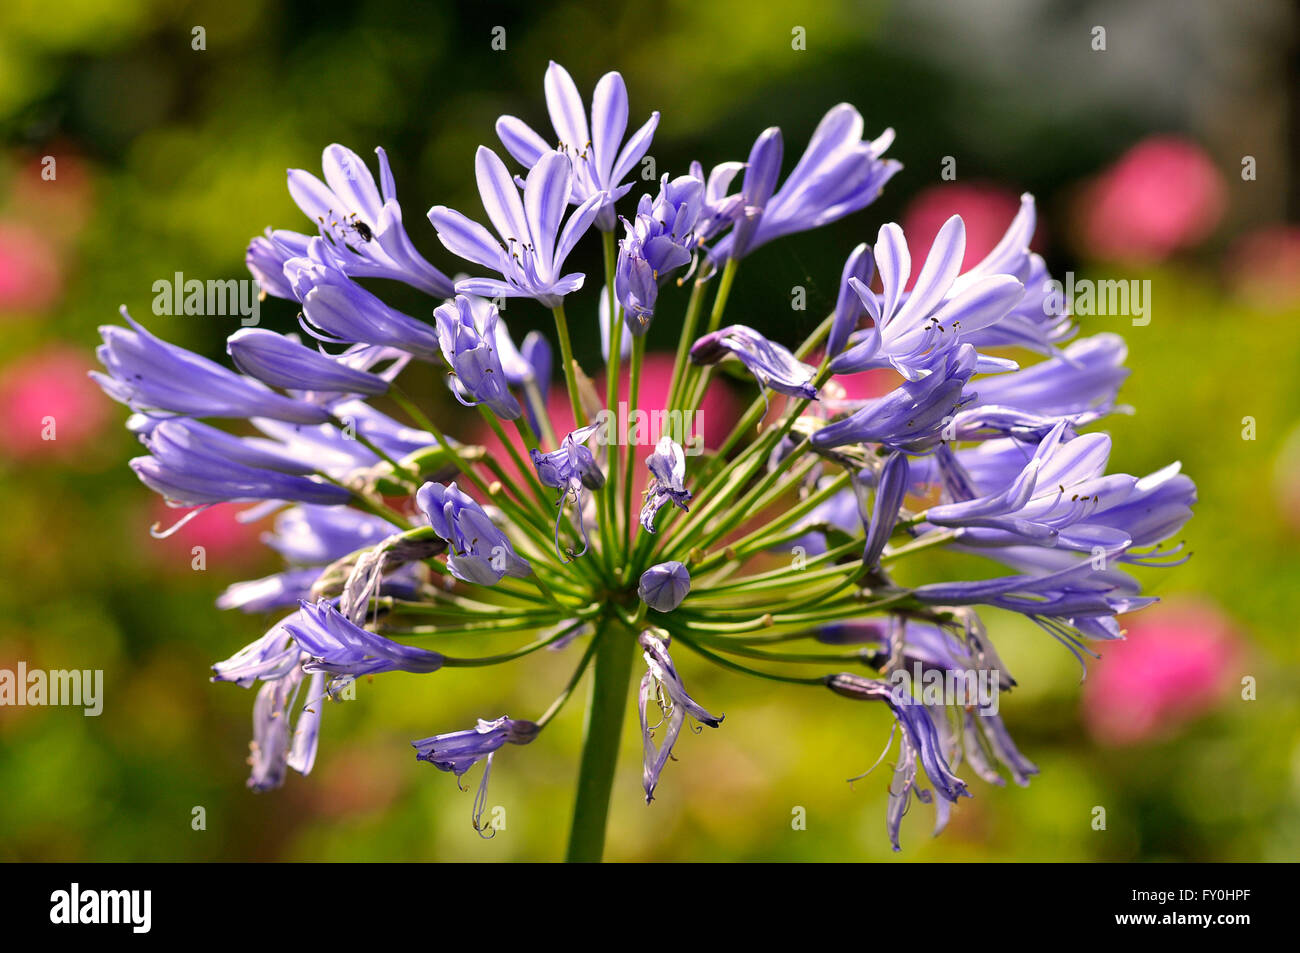 Single blue agapanthus flower seen from profile Stock Photo